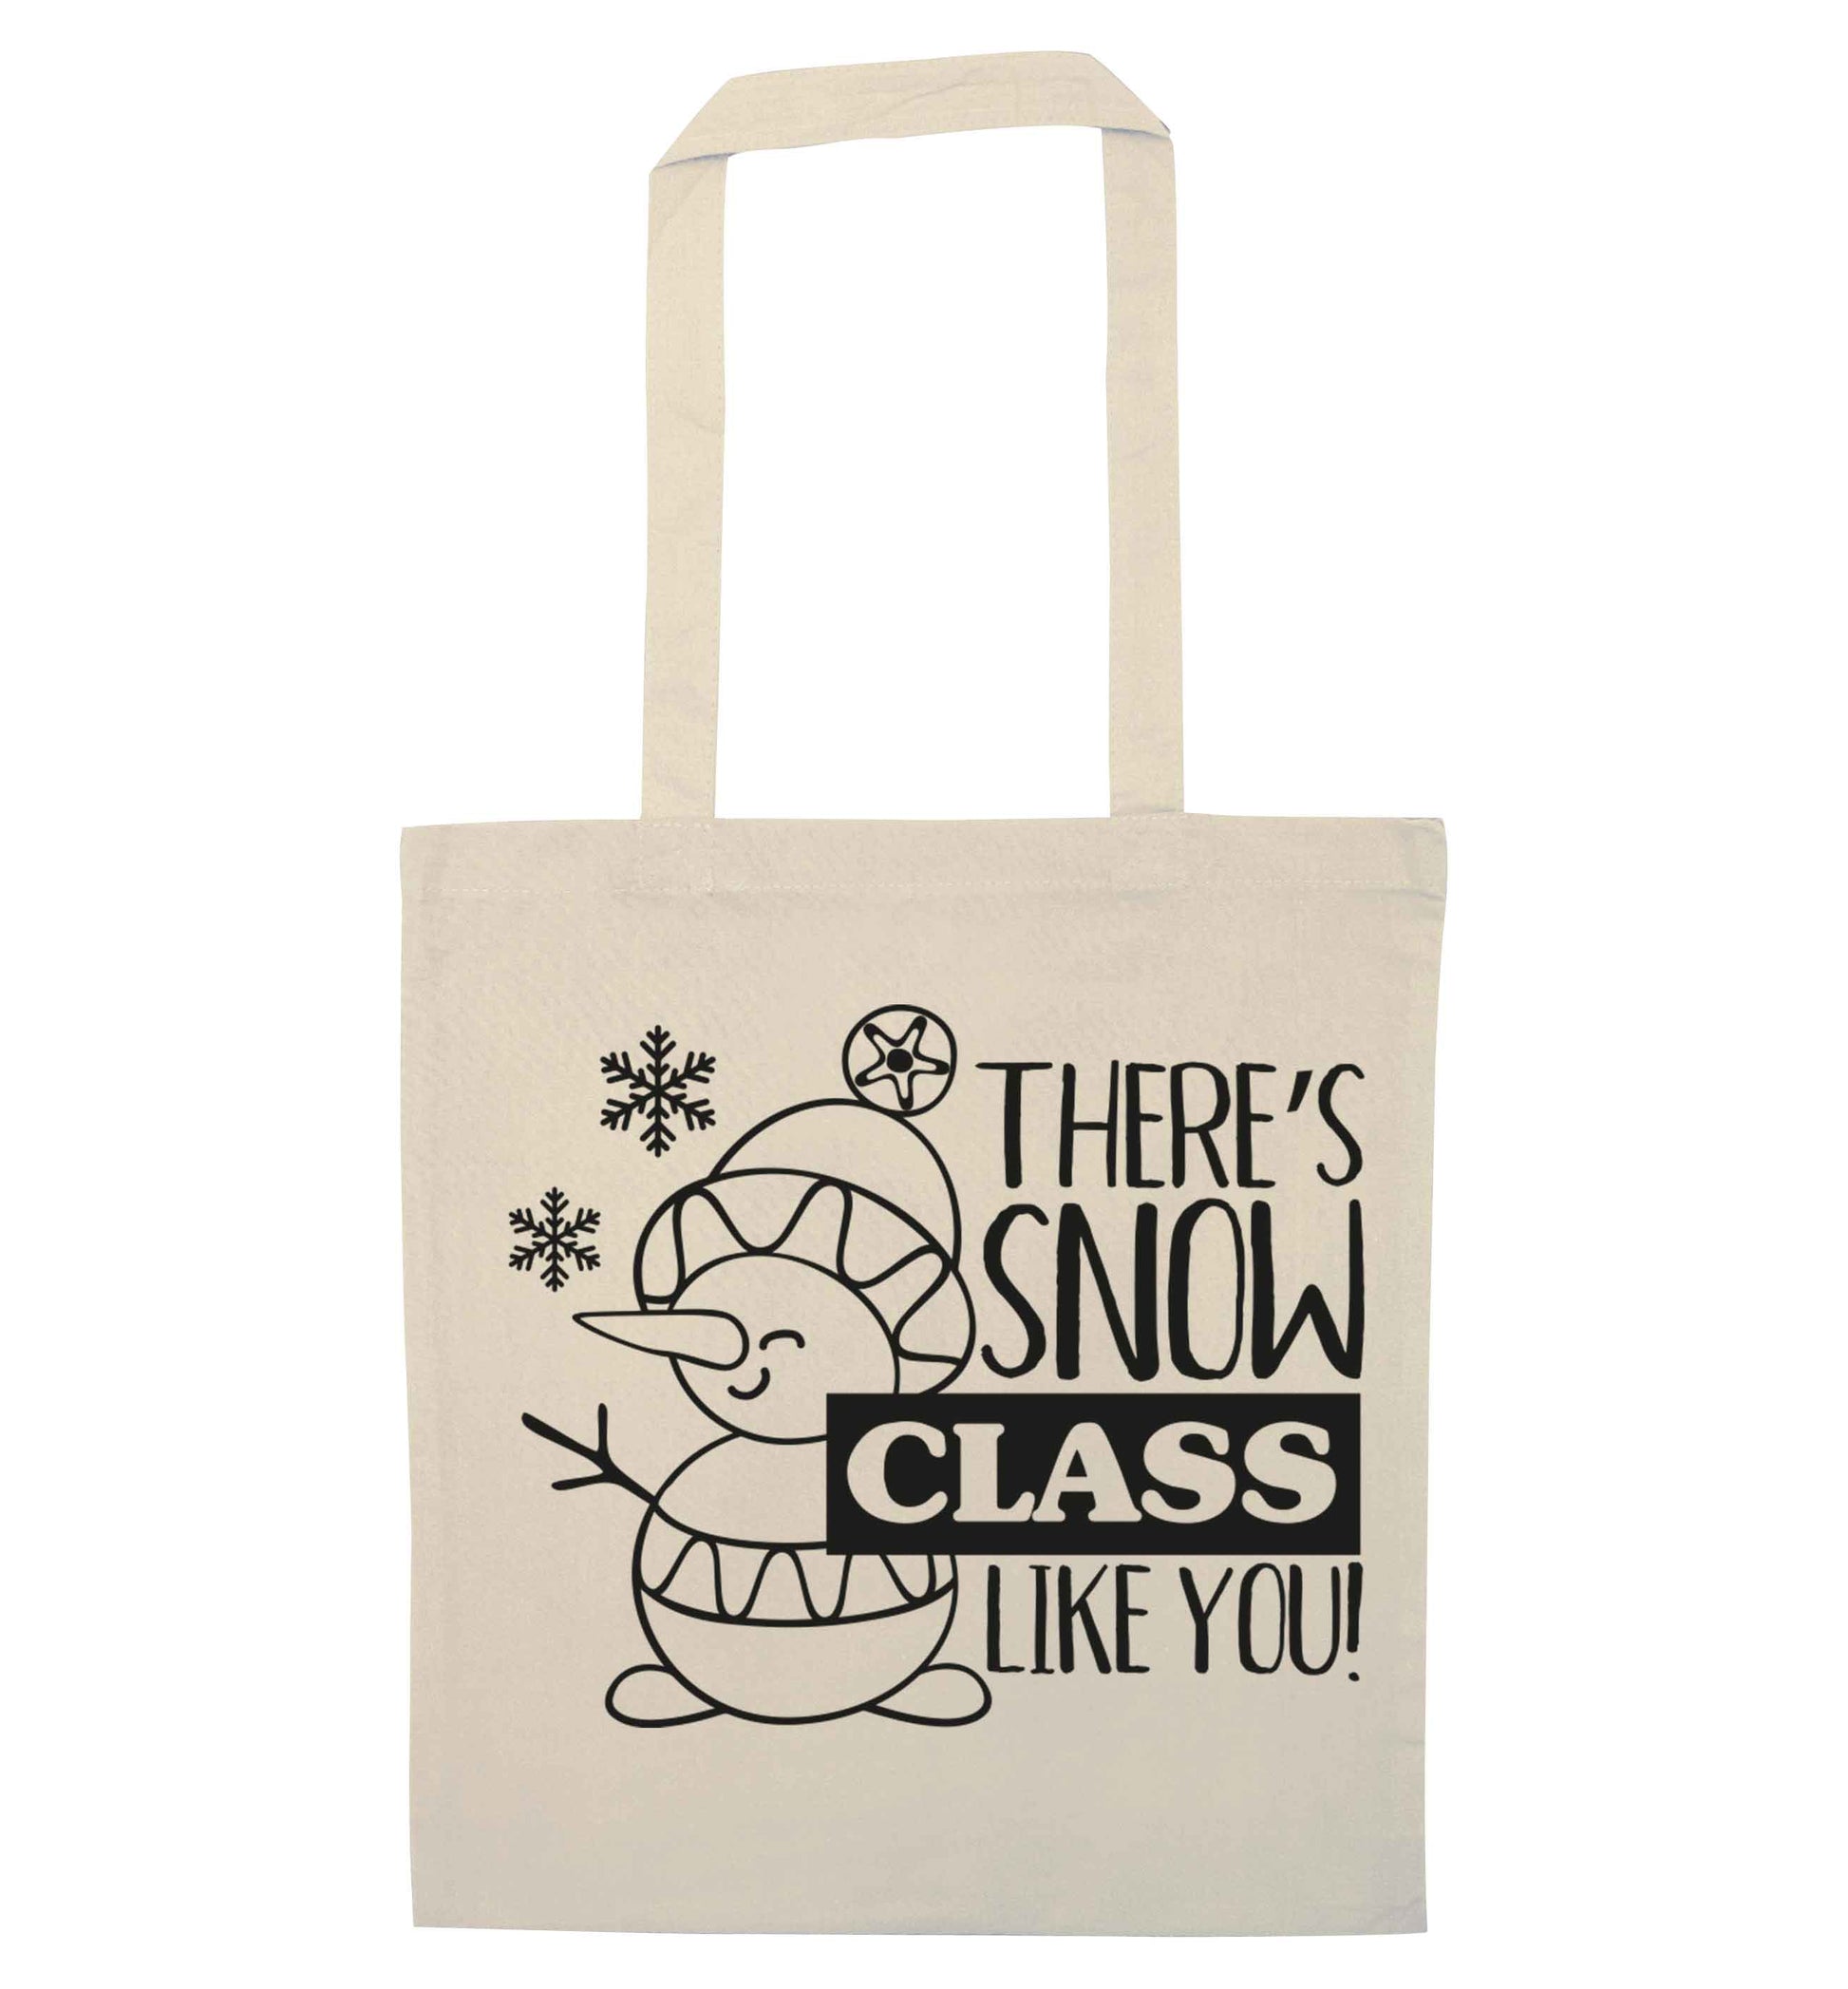 There's snow class like you natural tote bag